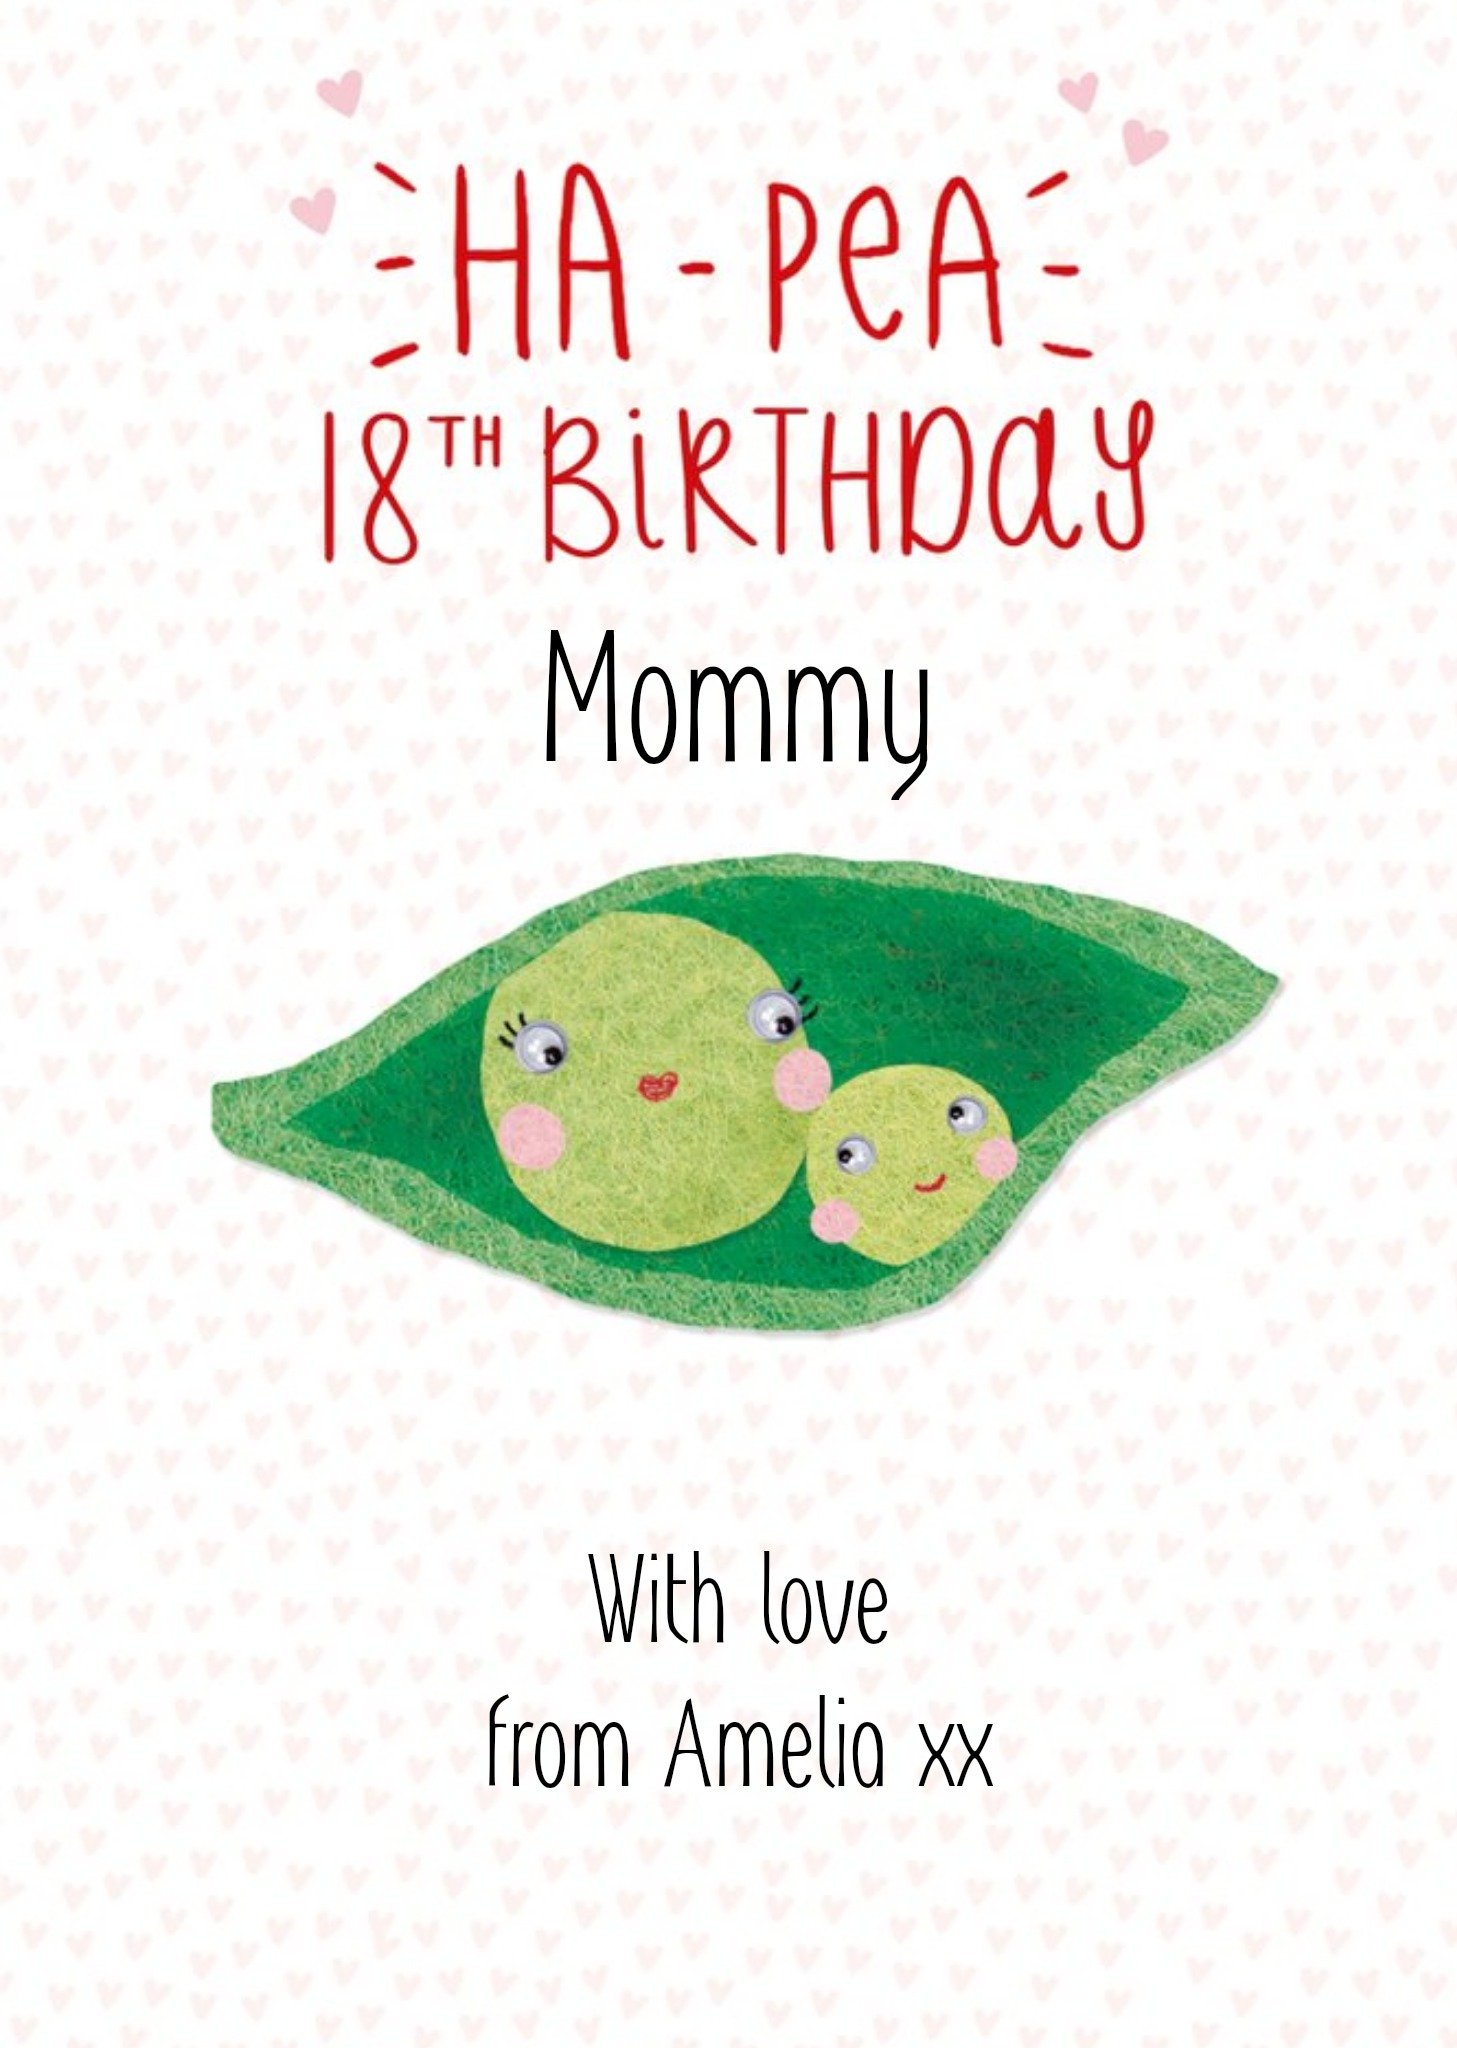 Moonpig Clintons Illustrated Peas In Pod 18th Mommy Birthday Card, Large